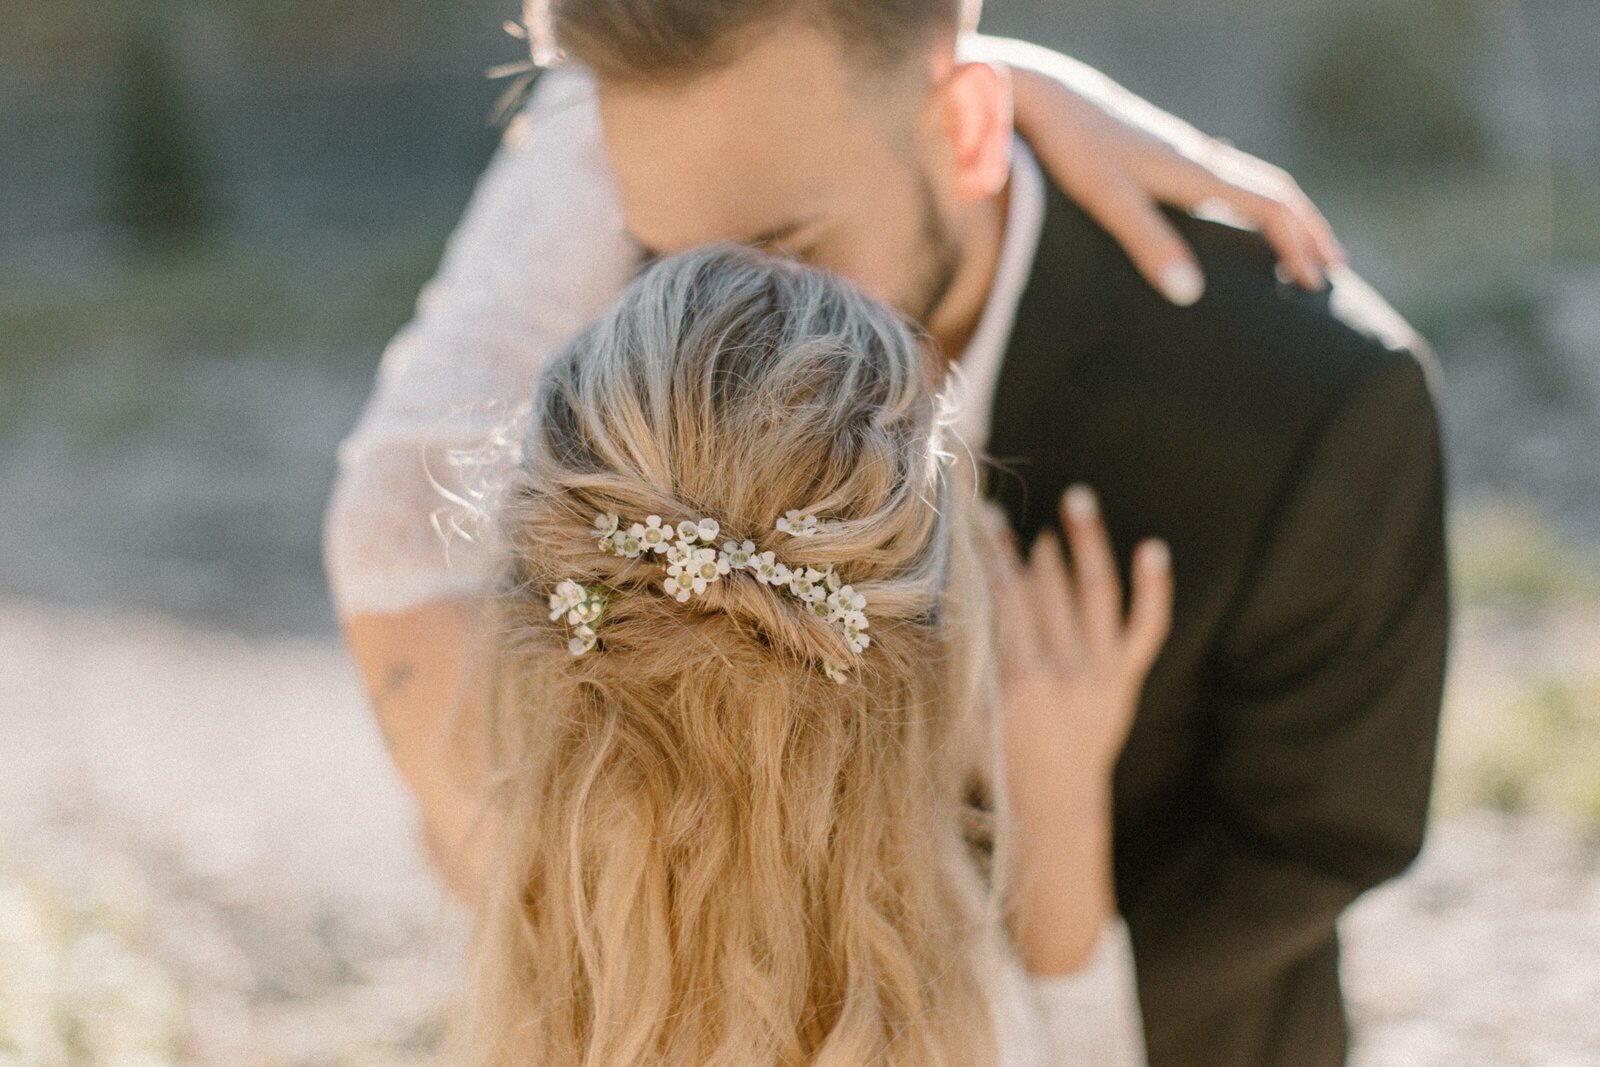 groom dipping bride with flowers in her hair